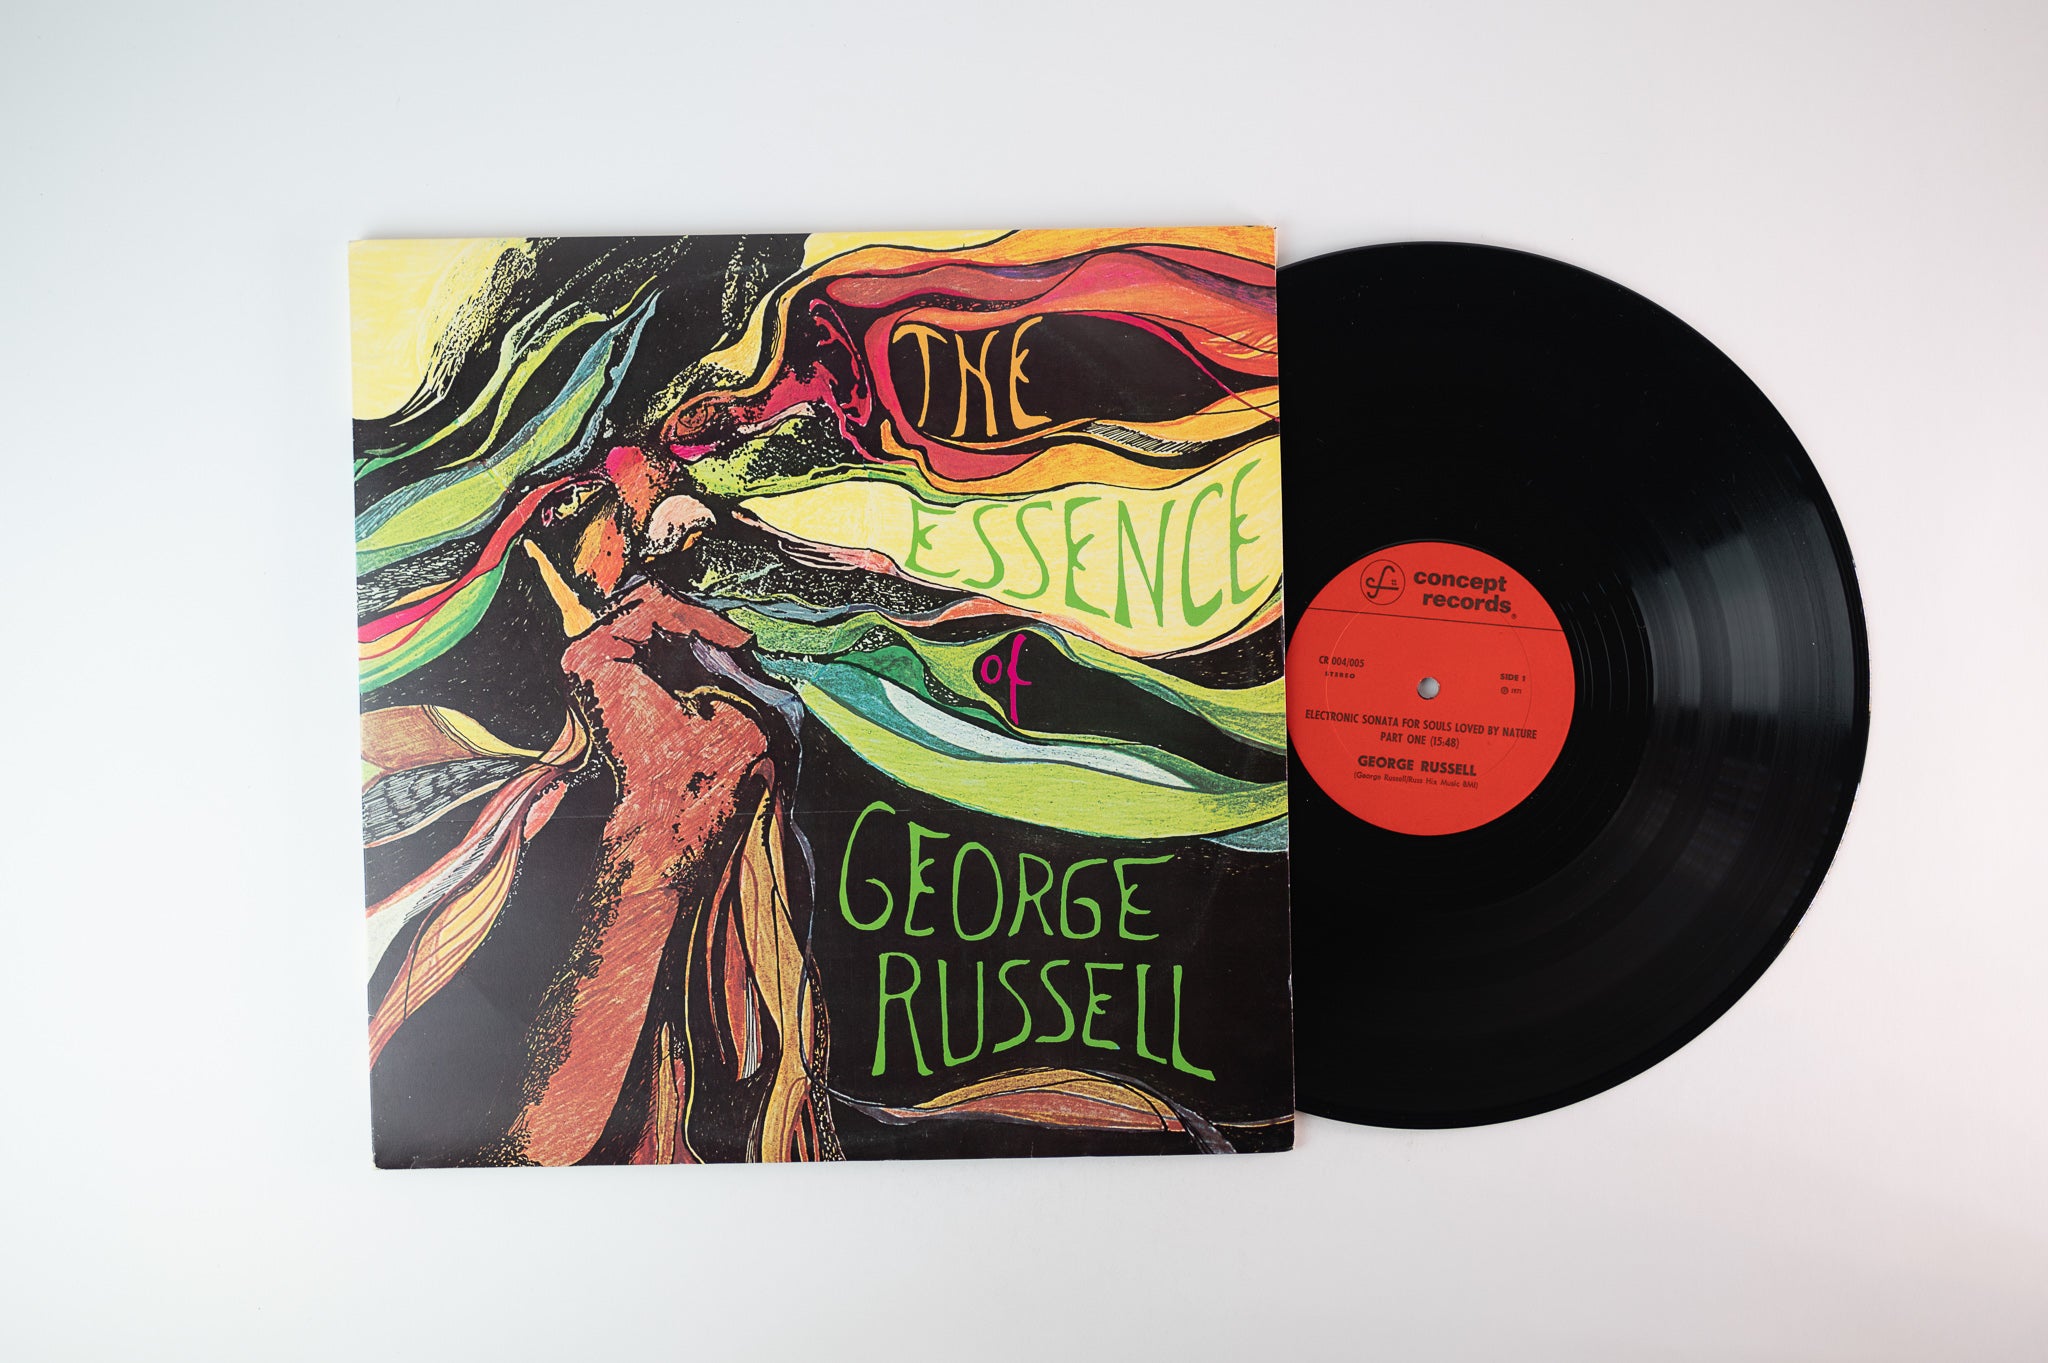 George Russell - The Essence Of George Russell on Concept Records Reissue